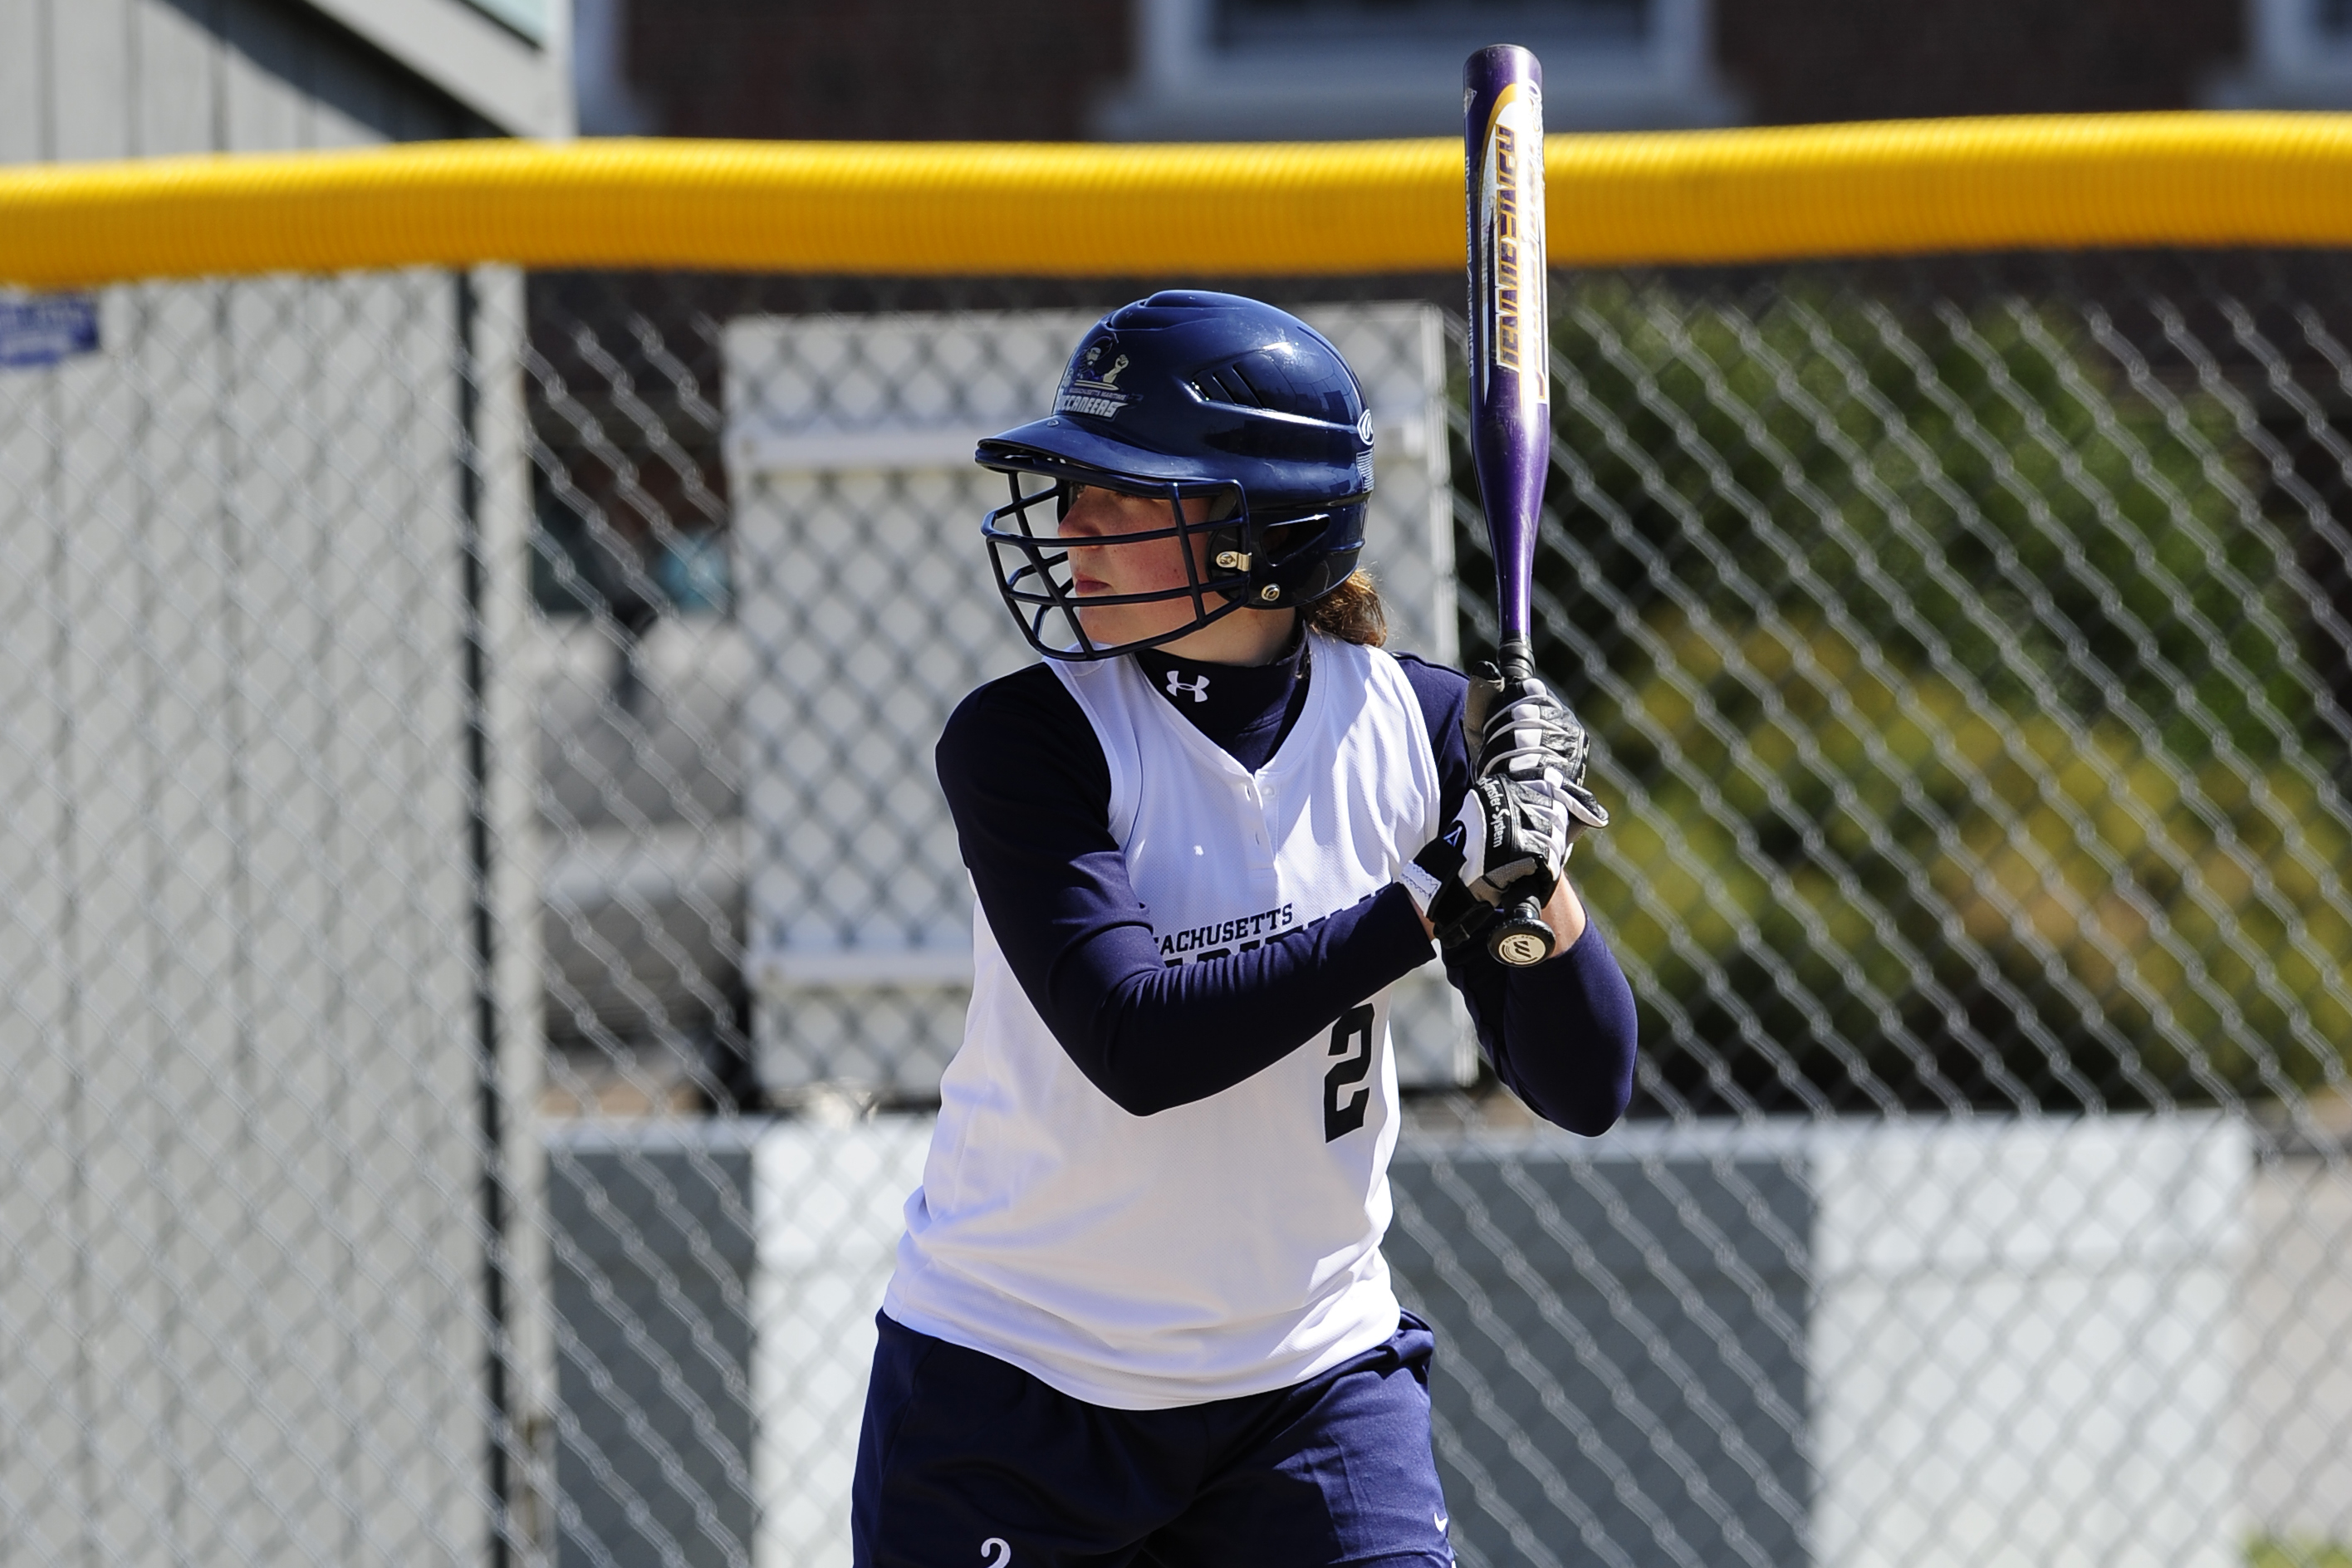 Beaulieu Raps Out Pair Of Hits, Drives In Run As Softball Drops MASCAC Doubleheader Decisions At MCLA